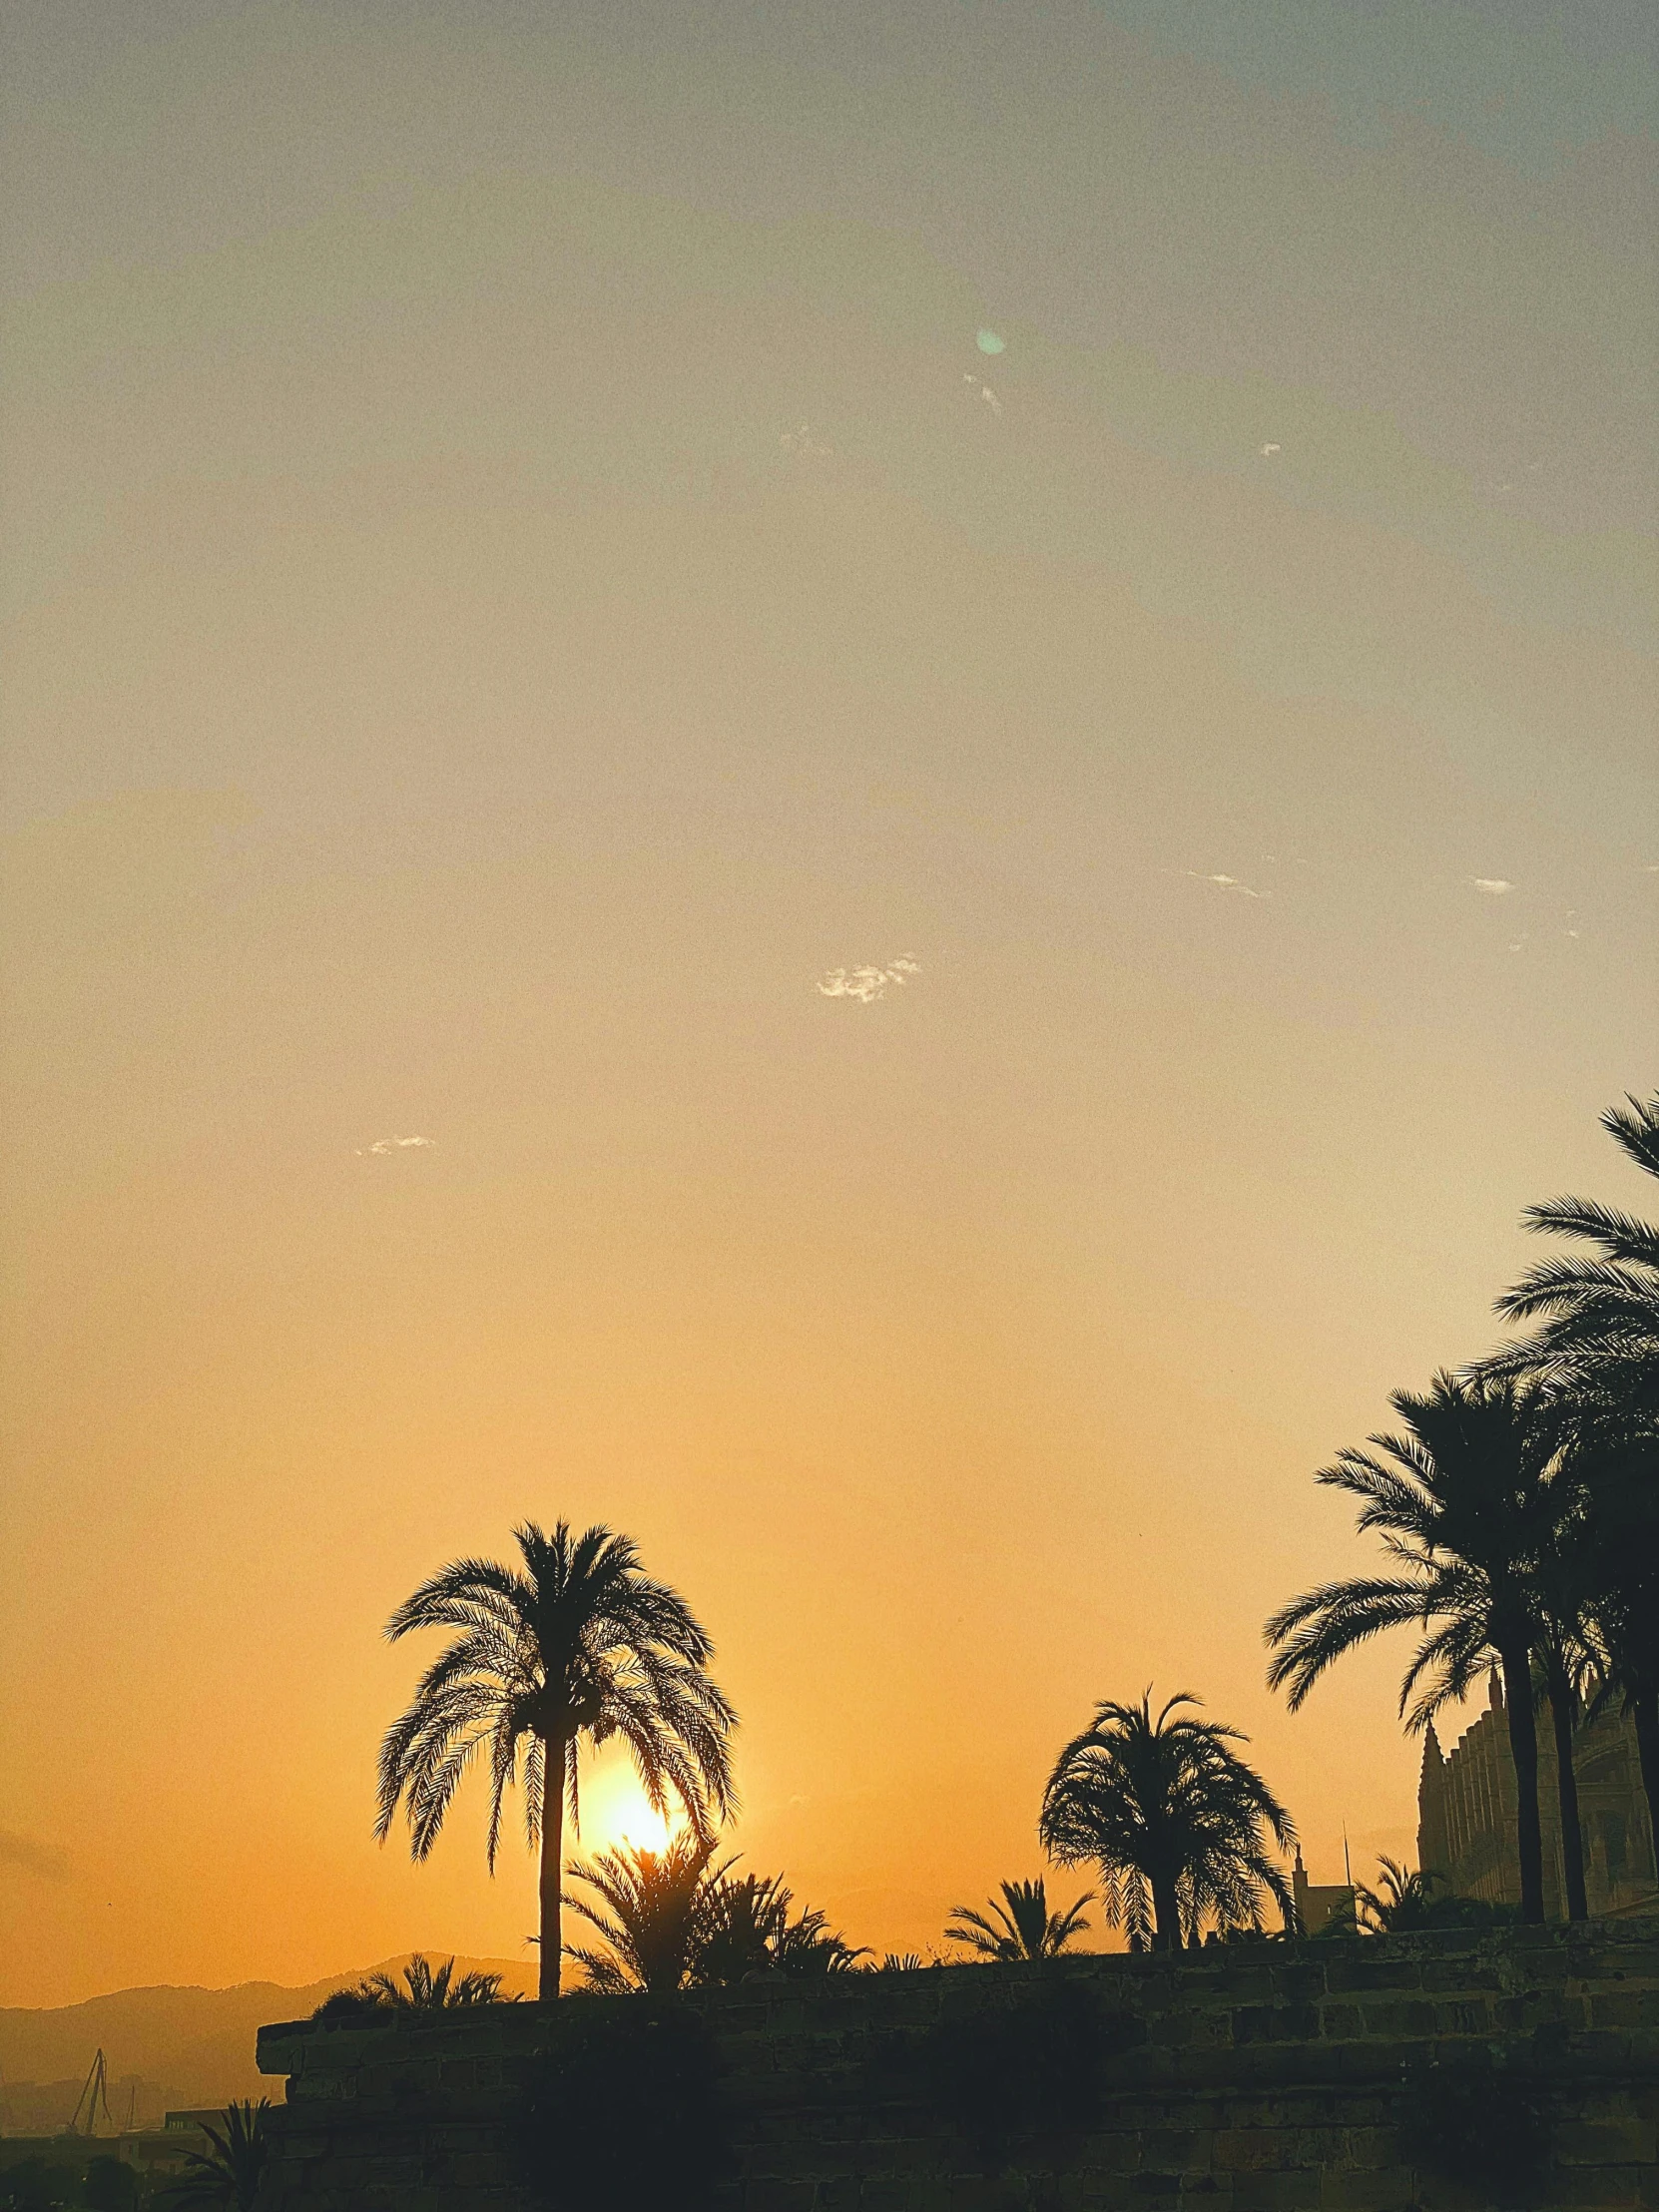 a couple of palm trees sitting on top of a lush green field, a picture, pexels contest winner, aestheticism, city sunset, ☁🌪🌙👩🏾, marbella, golden colors